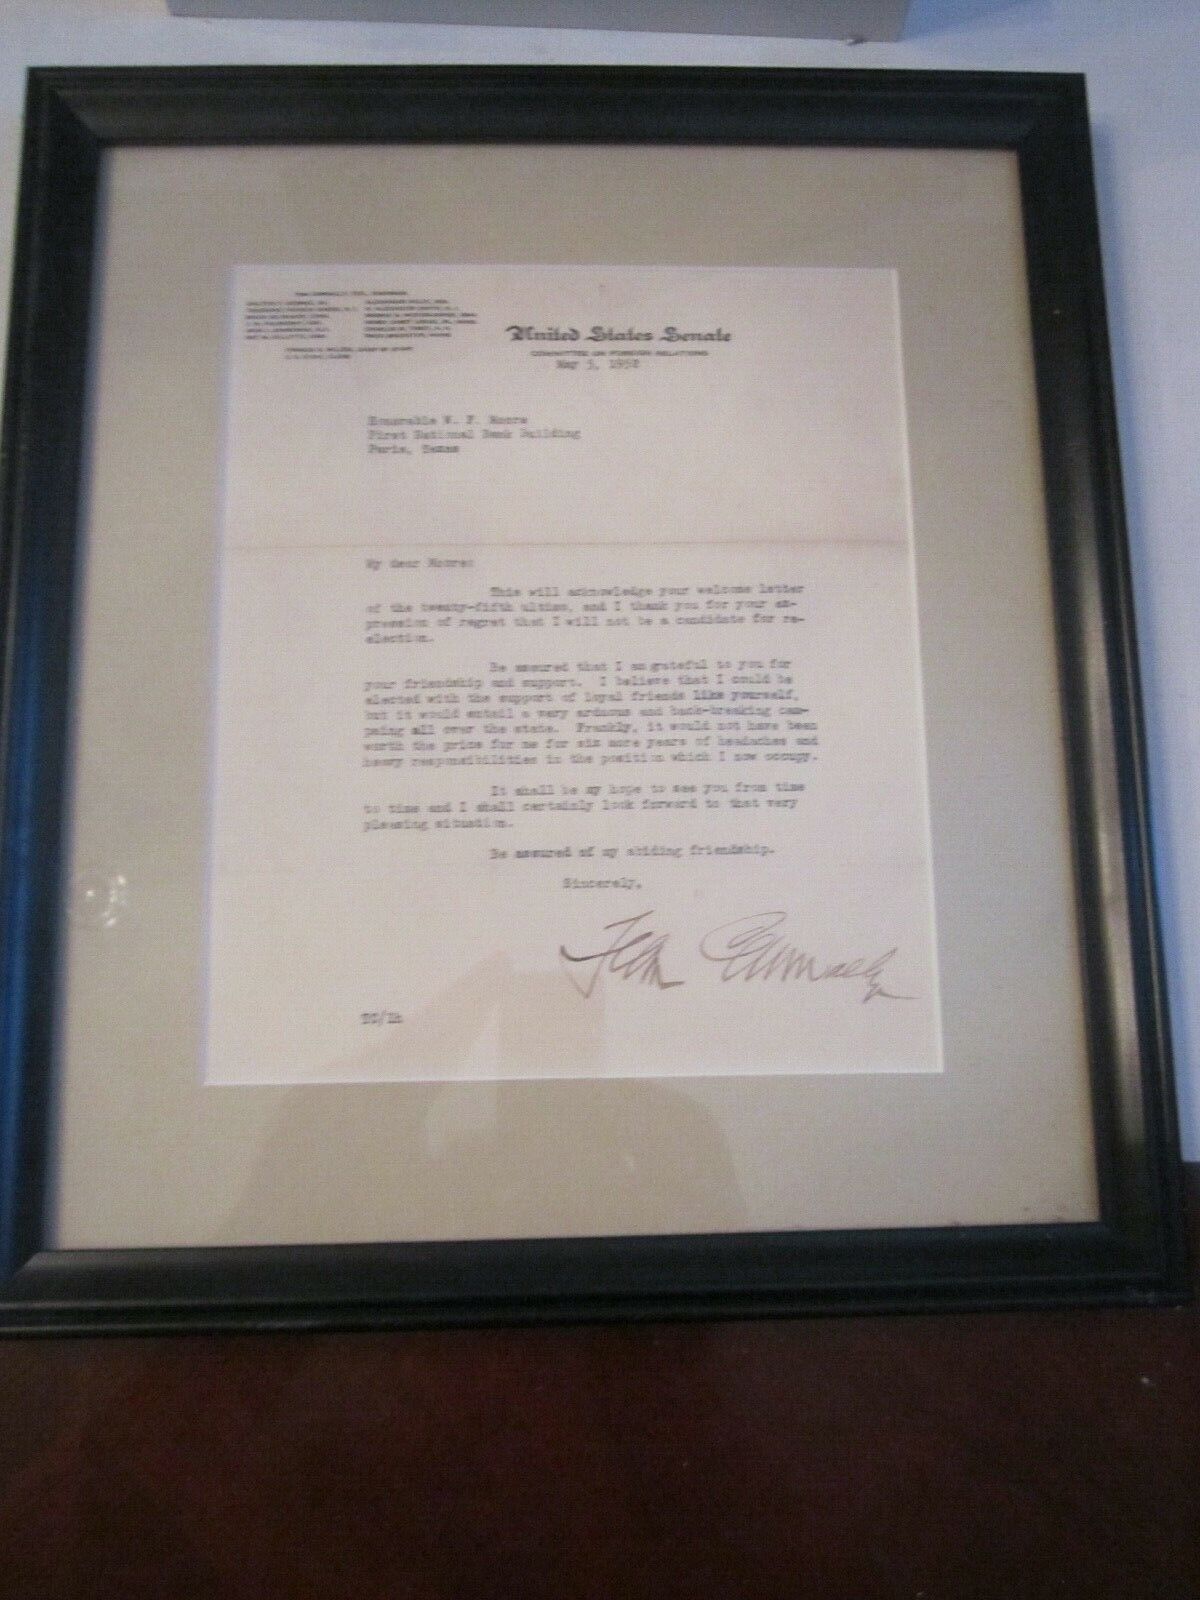 1952 TEXAS SENATOR TOM CONNALLY SIGNED LETTER - COMMITTEE ON FOREIGN RELATIONS